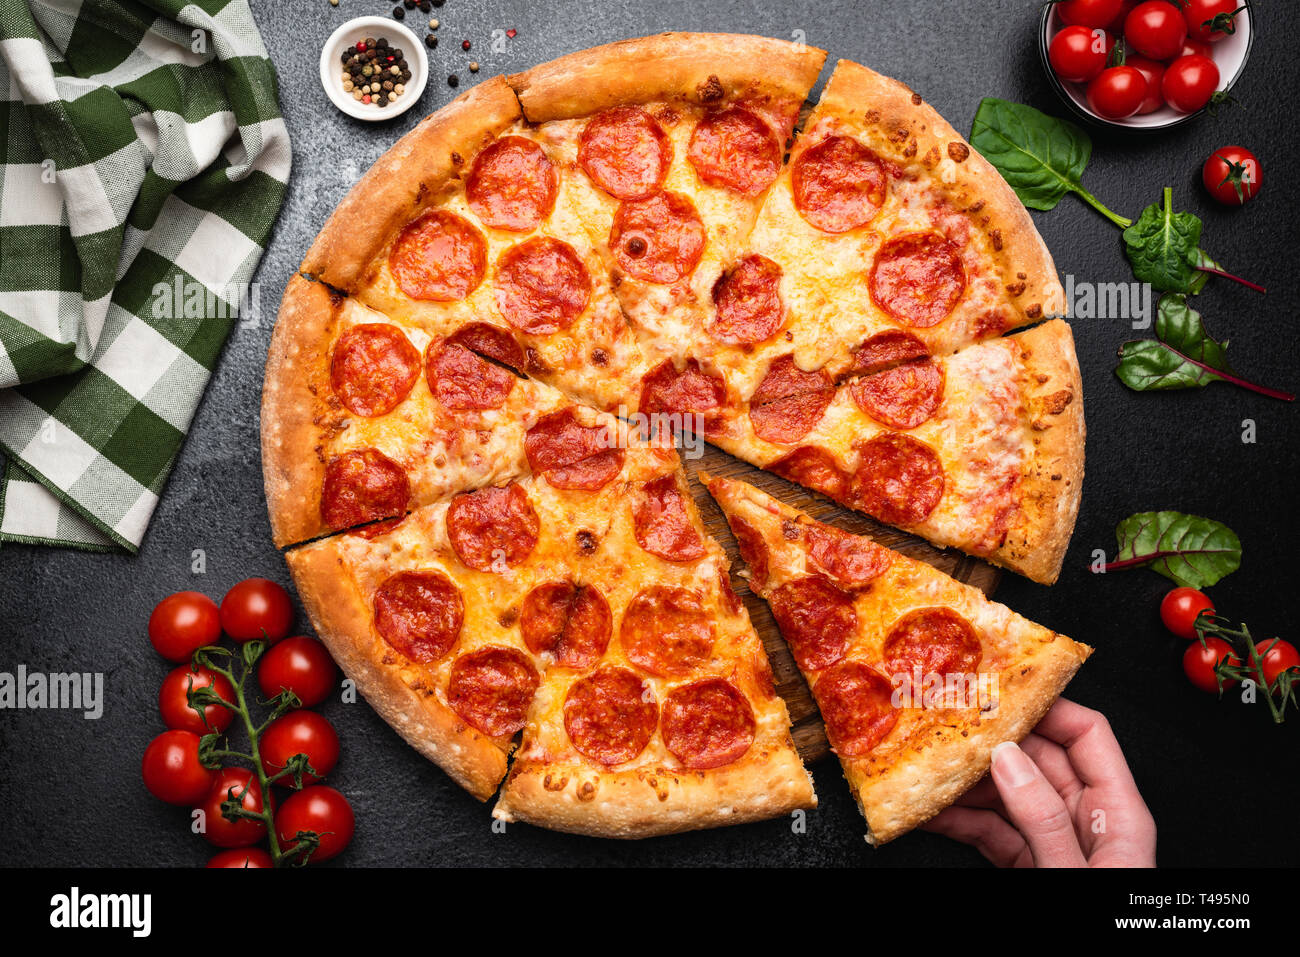 Pepperoni pizza on a black concrete background. Hand picking slice of pepperoni pizza. Table top view. Party food, fast food concept Stock Photo